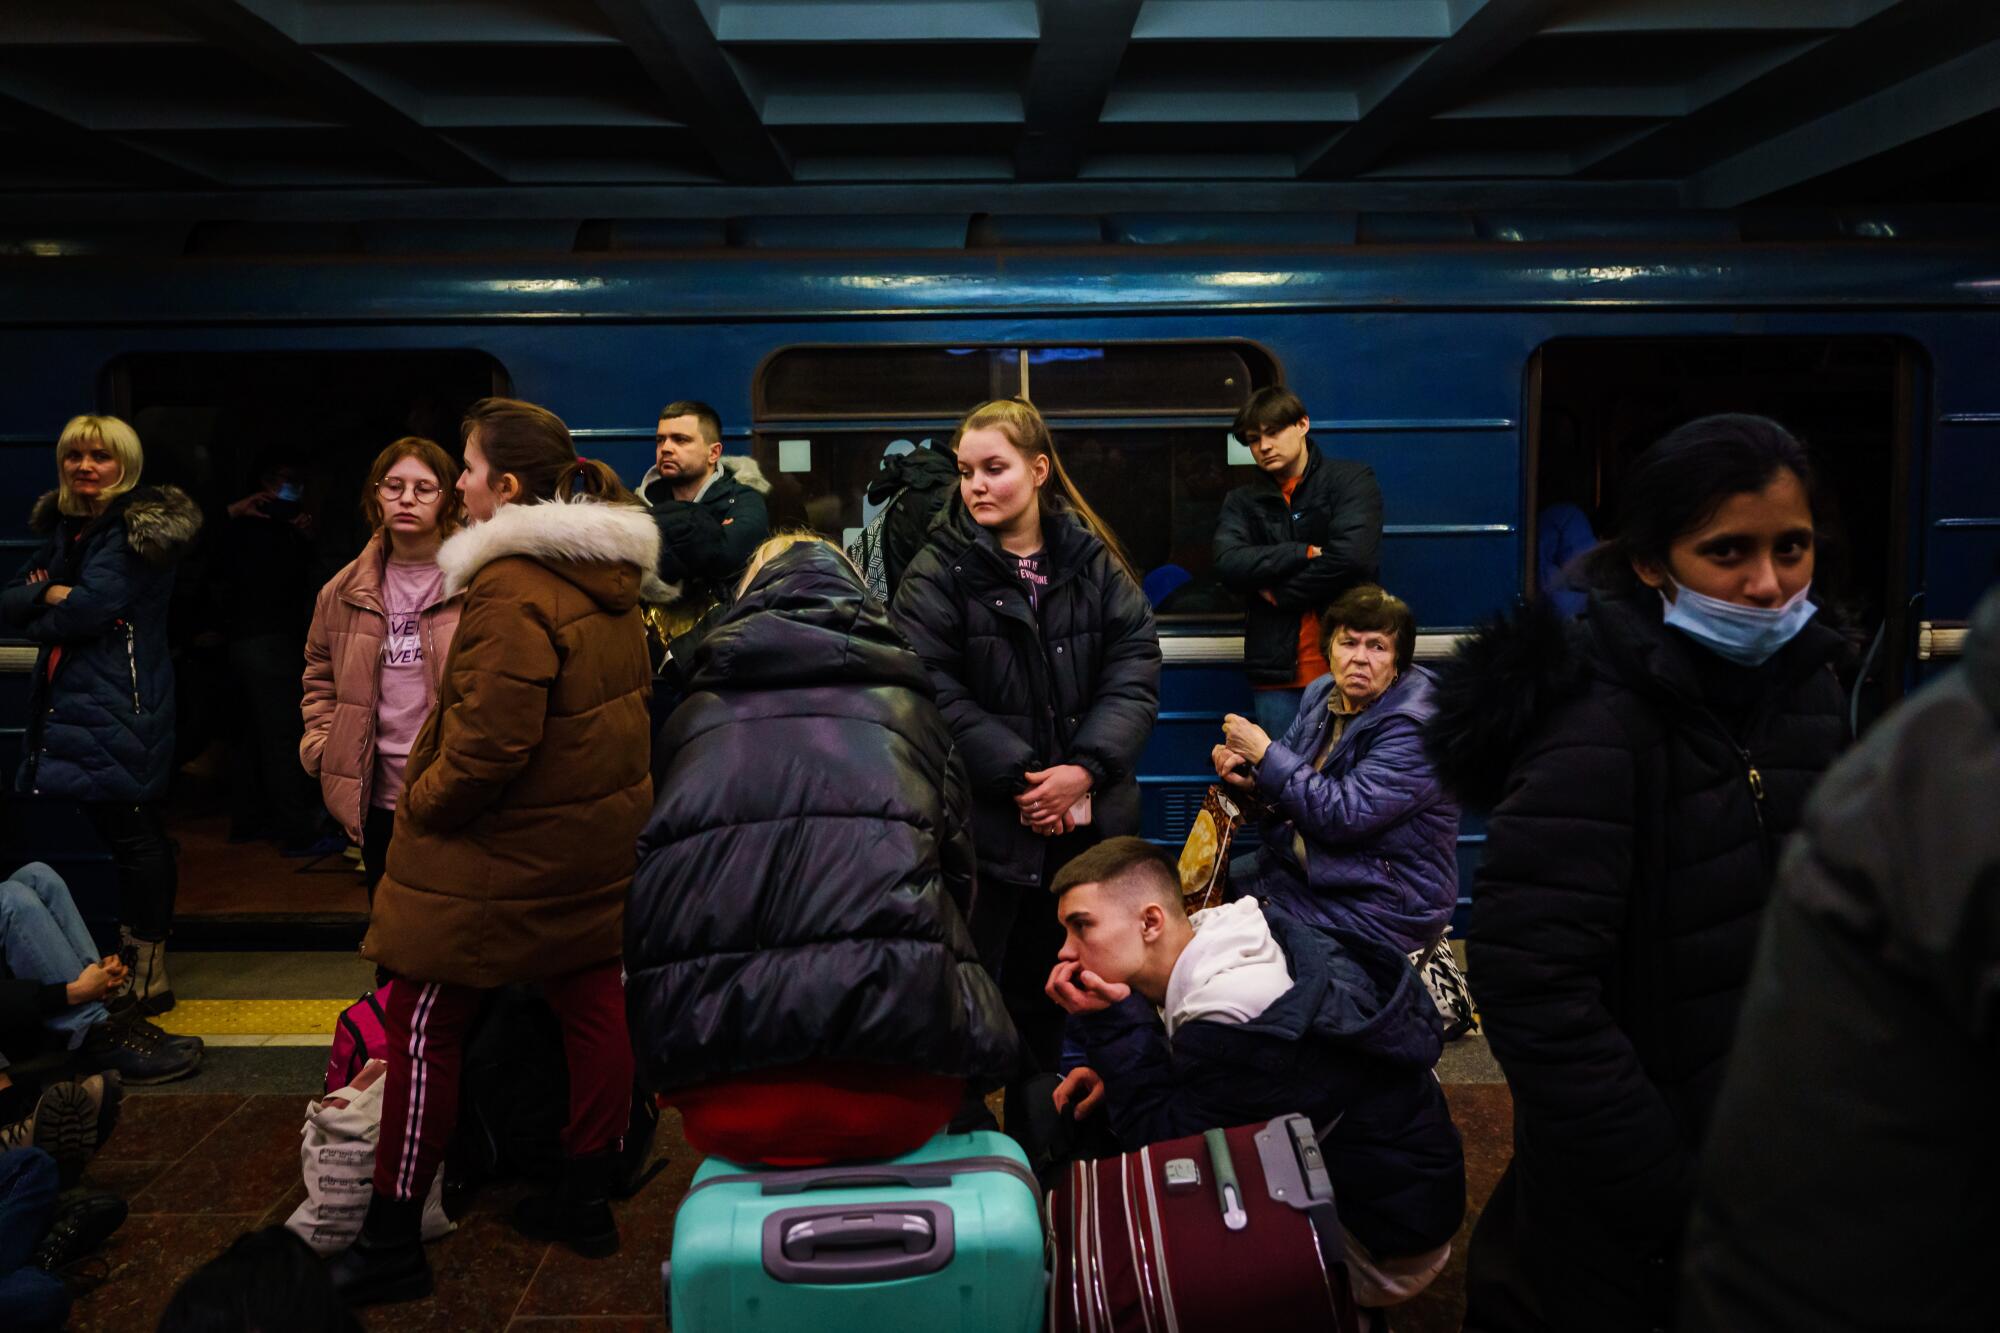 Hundreds of people seek shelter in a subway station.